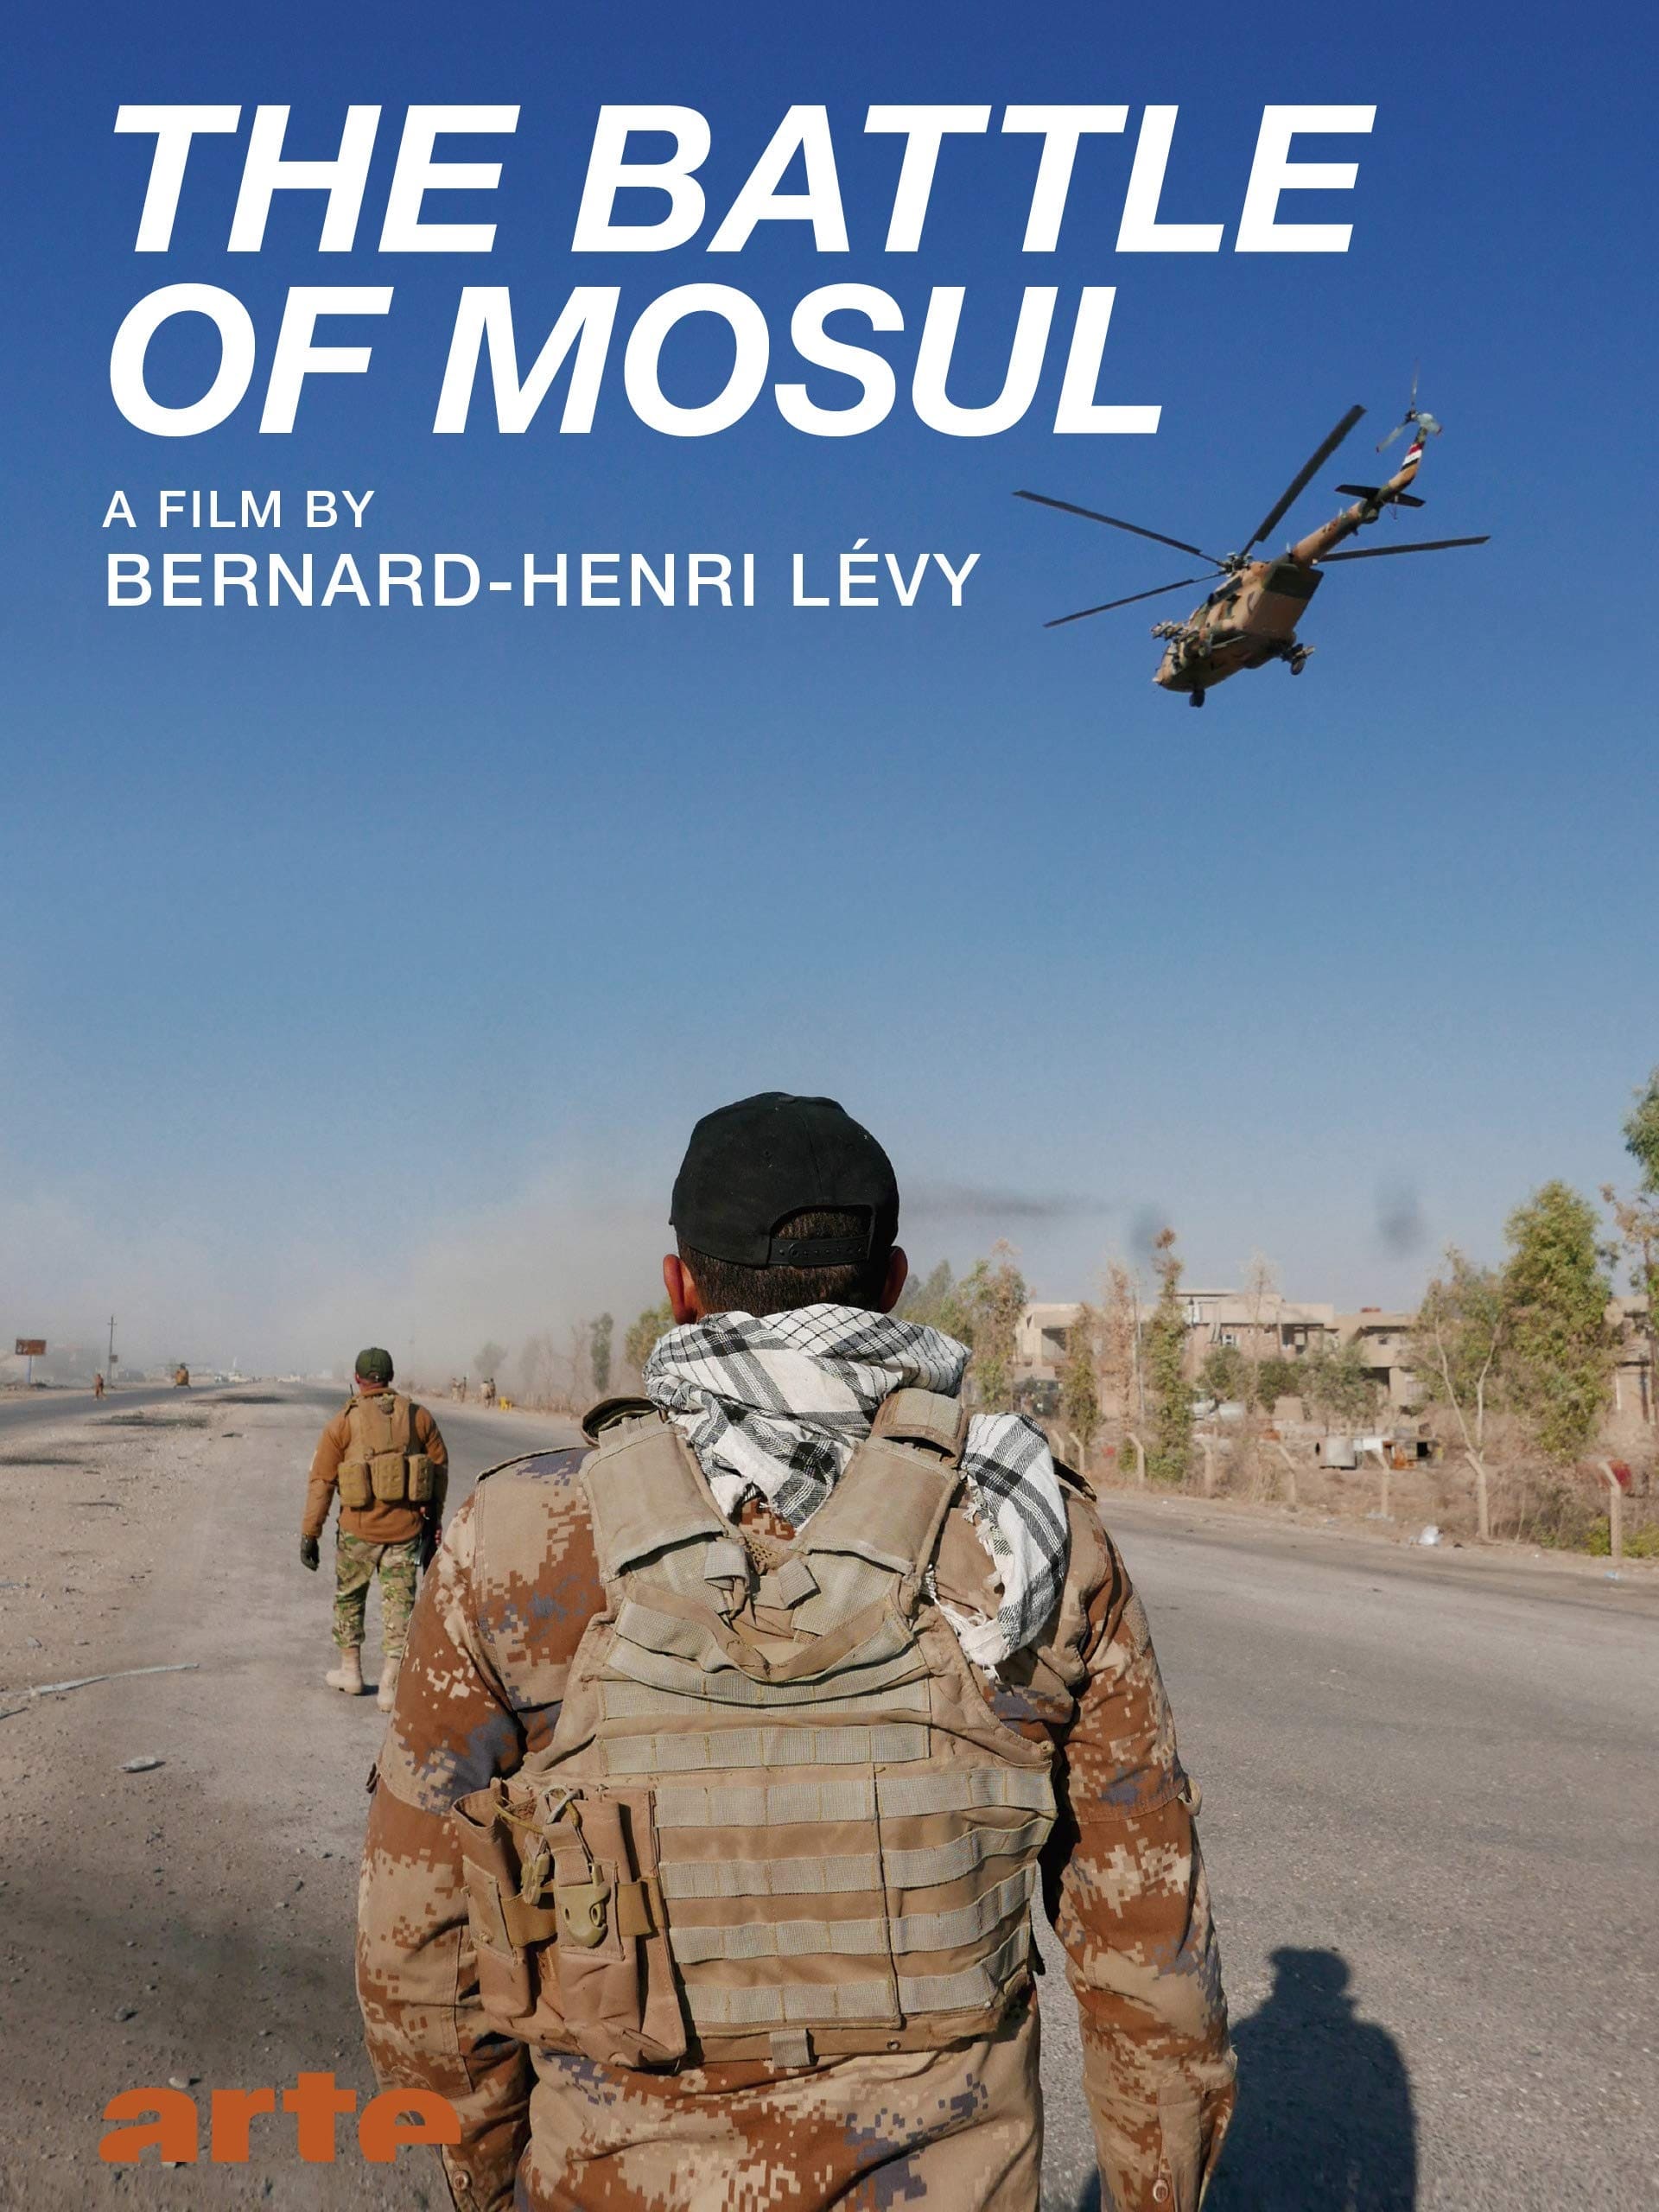 The Battle of Mosul